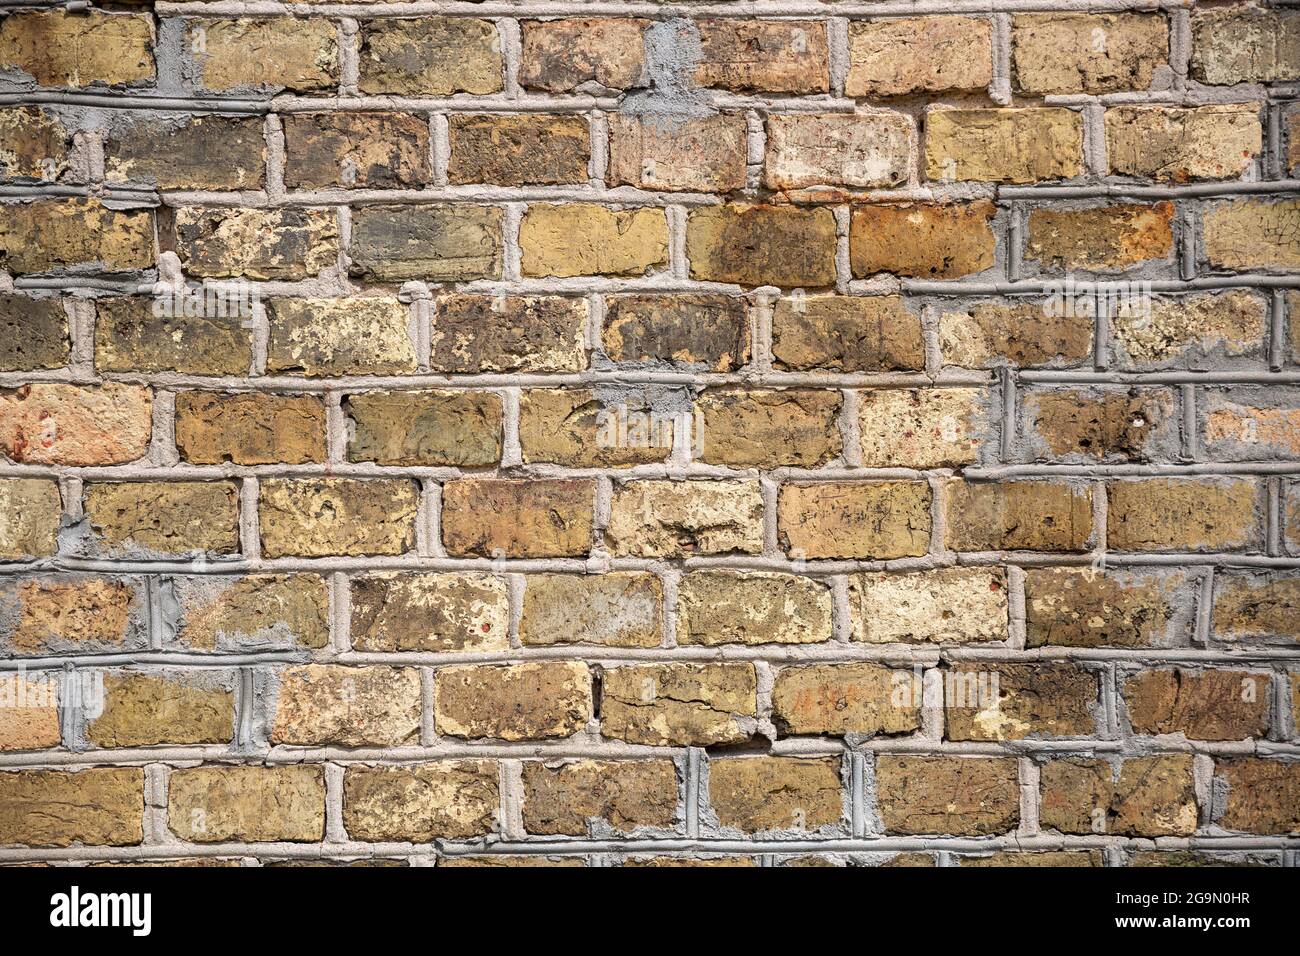 Wall of old bricks as a background Stock Photo